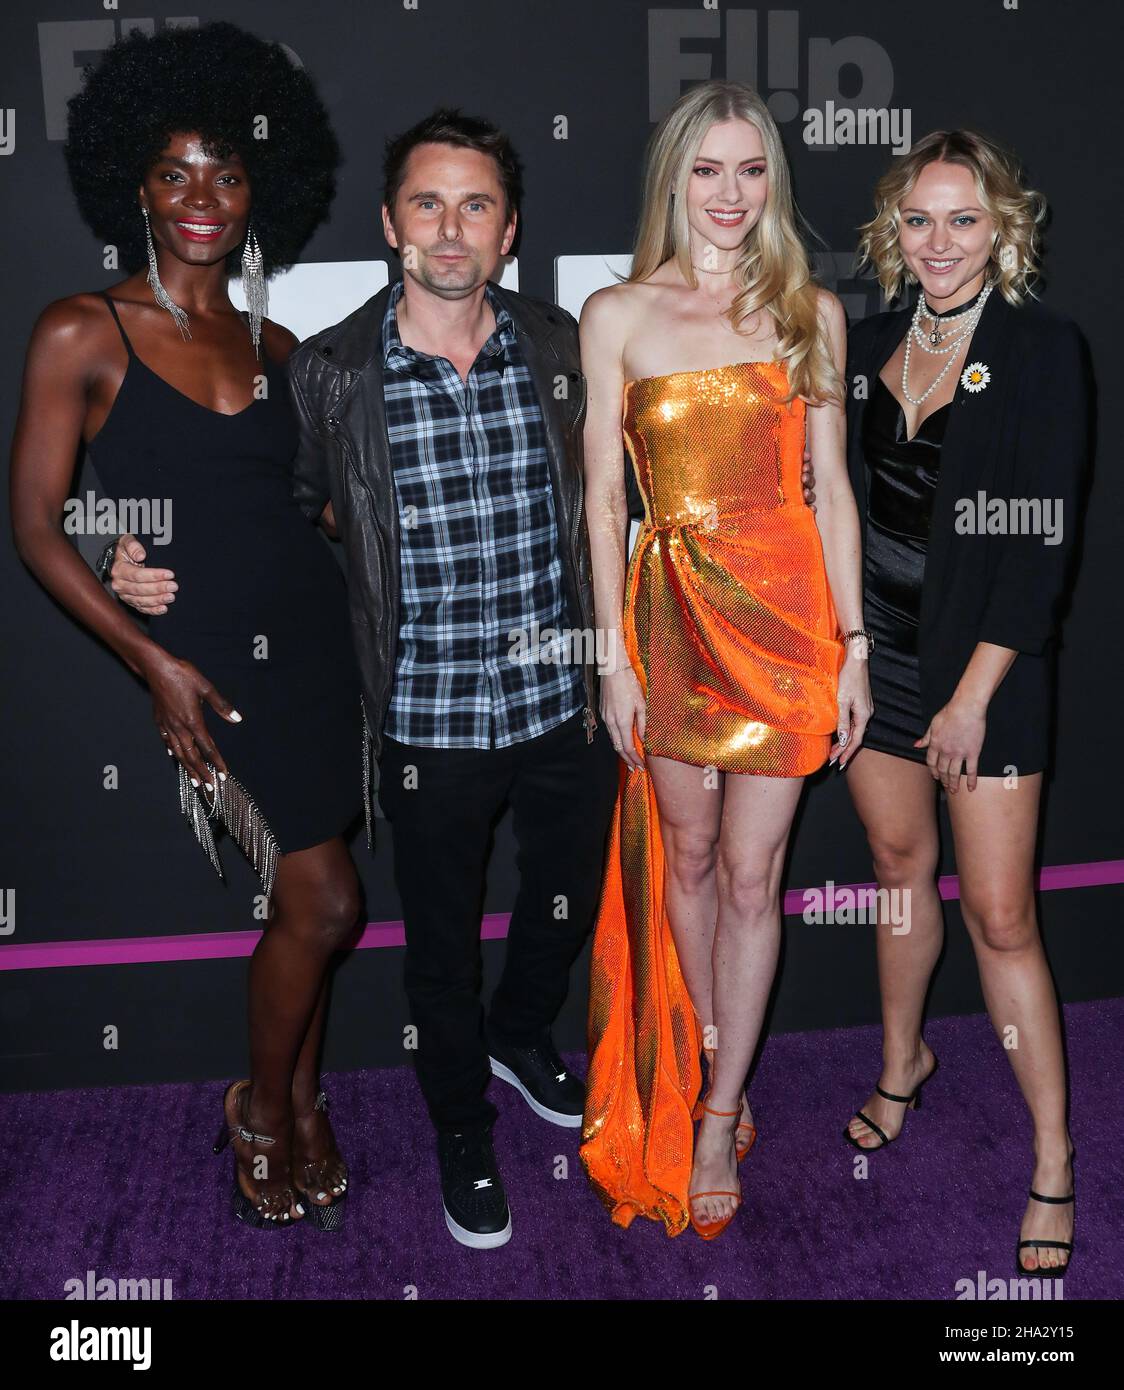 Hollywood, United States. 09th Dec, 2021. HOLLYWOOD, LOS ANGELES, CALIFORNIA, USA - DECEMBER 09: Singer Matt Bellamy and wife/model Elle Evans Bellamy arrive at the Flip Grand Launch Event Hosted by Grammy-Nominated Artist Halsey with Performances by Scout Willis, BIA, and Kehlani held at Avalon Hollywood on December 9, 2021 in Hollywood, Los Angeles, California, United States. (Photo by Xavier Collin/Image Press Agency) Credit: Image Press Agency/Alamy Live News Stock Photo